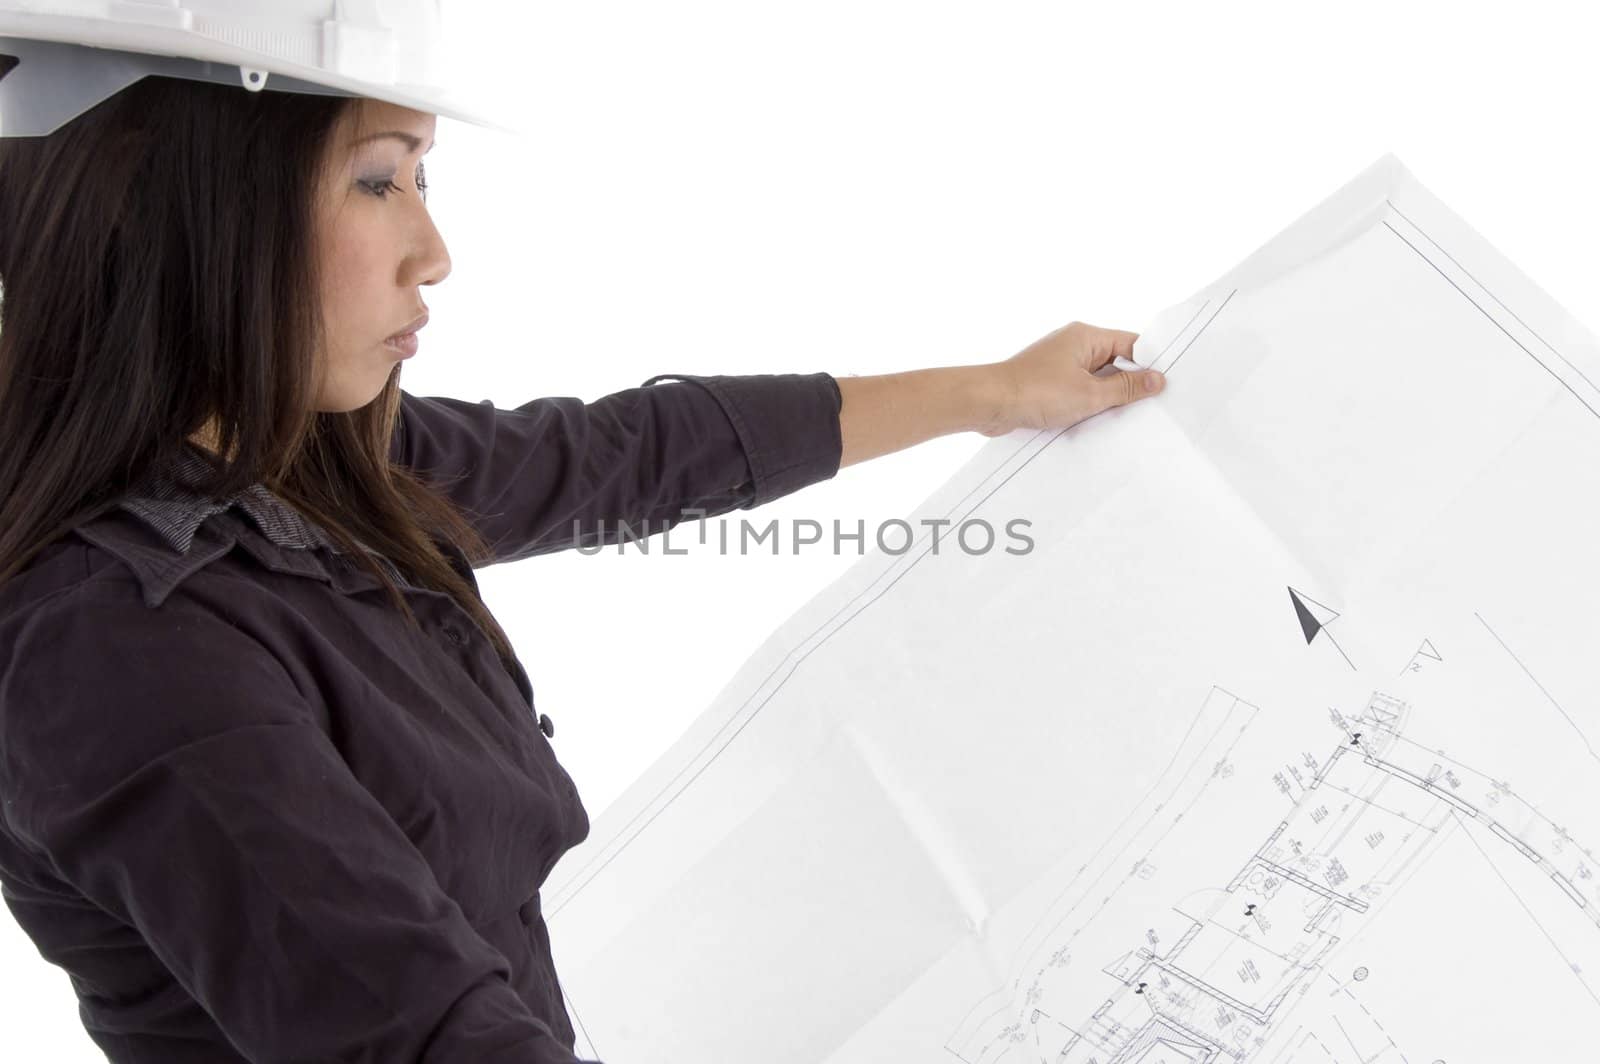 female architect looking at blueprints by imagerymajestic